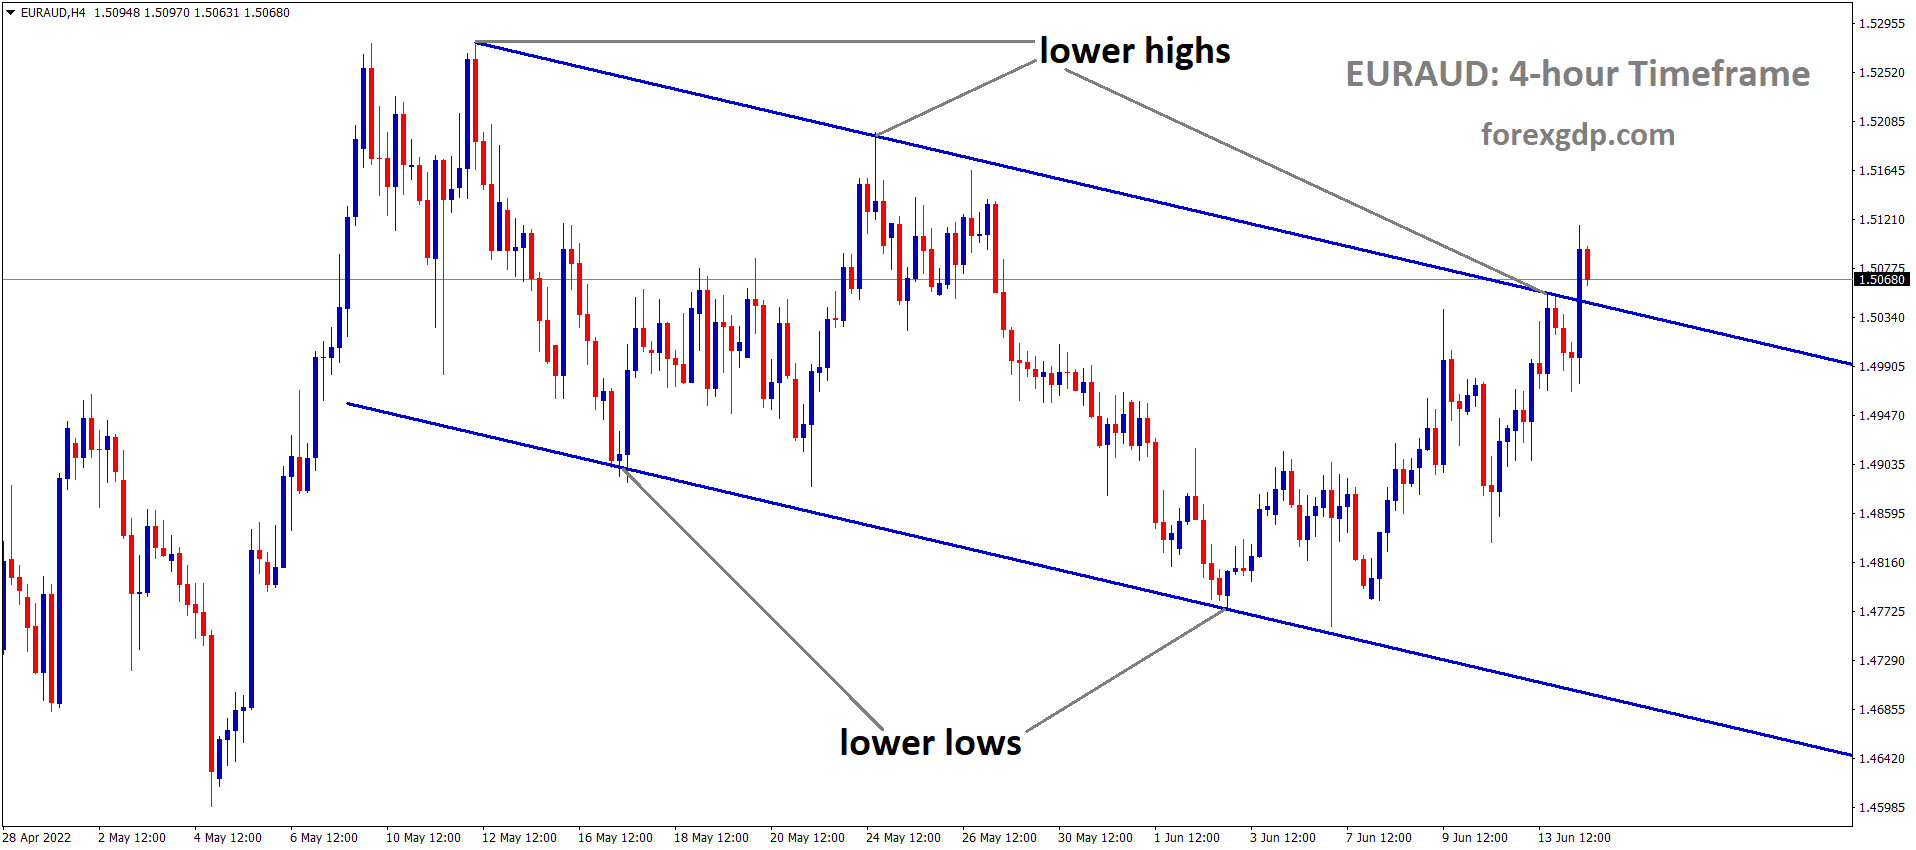 EURAUD is moving in the Descending channel and the market has reached the Lower high area of the channel